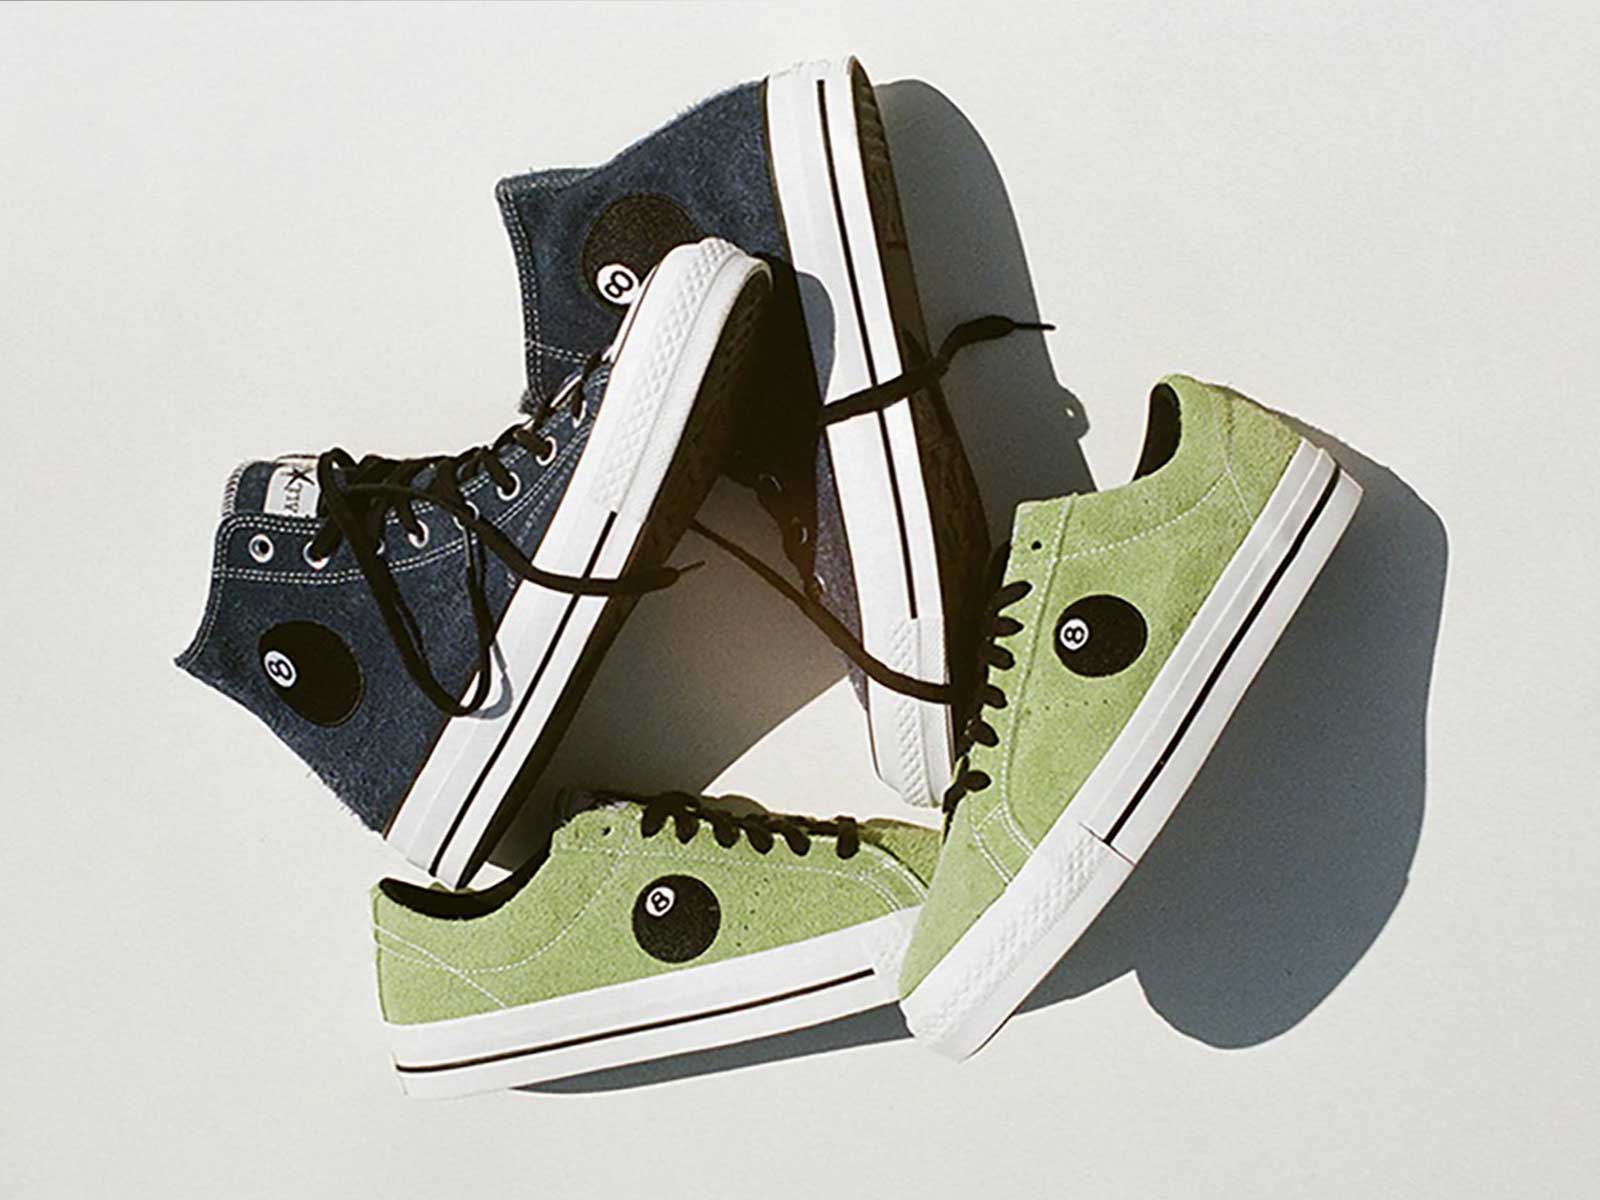 Converse brings back the iconic Stüssy billiard ball for its latest launch